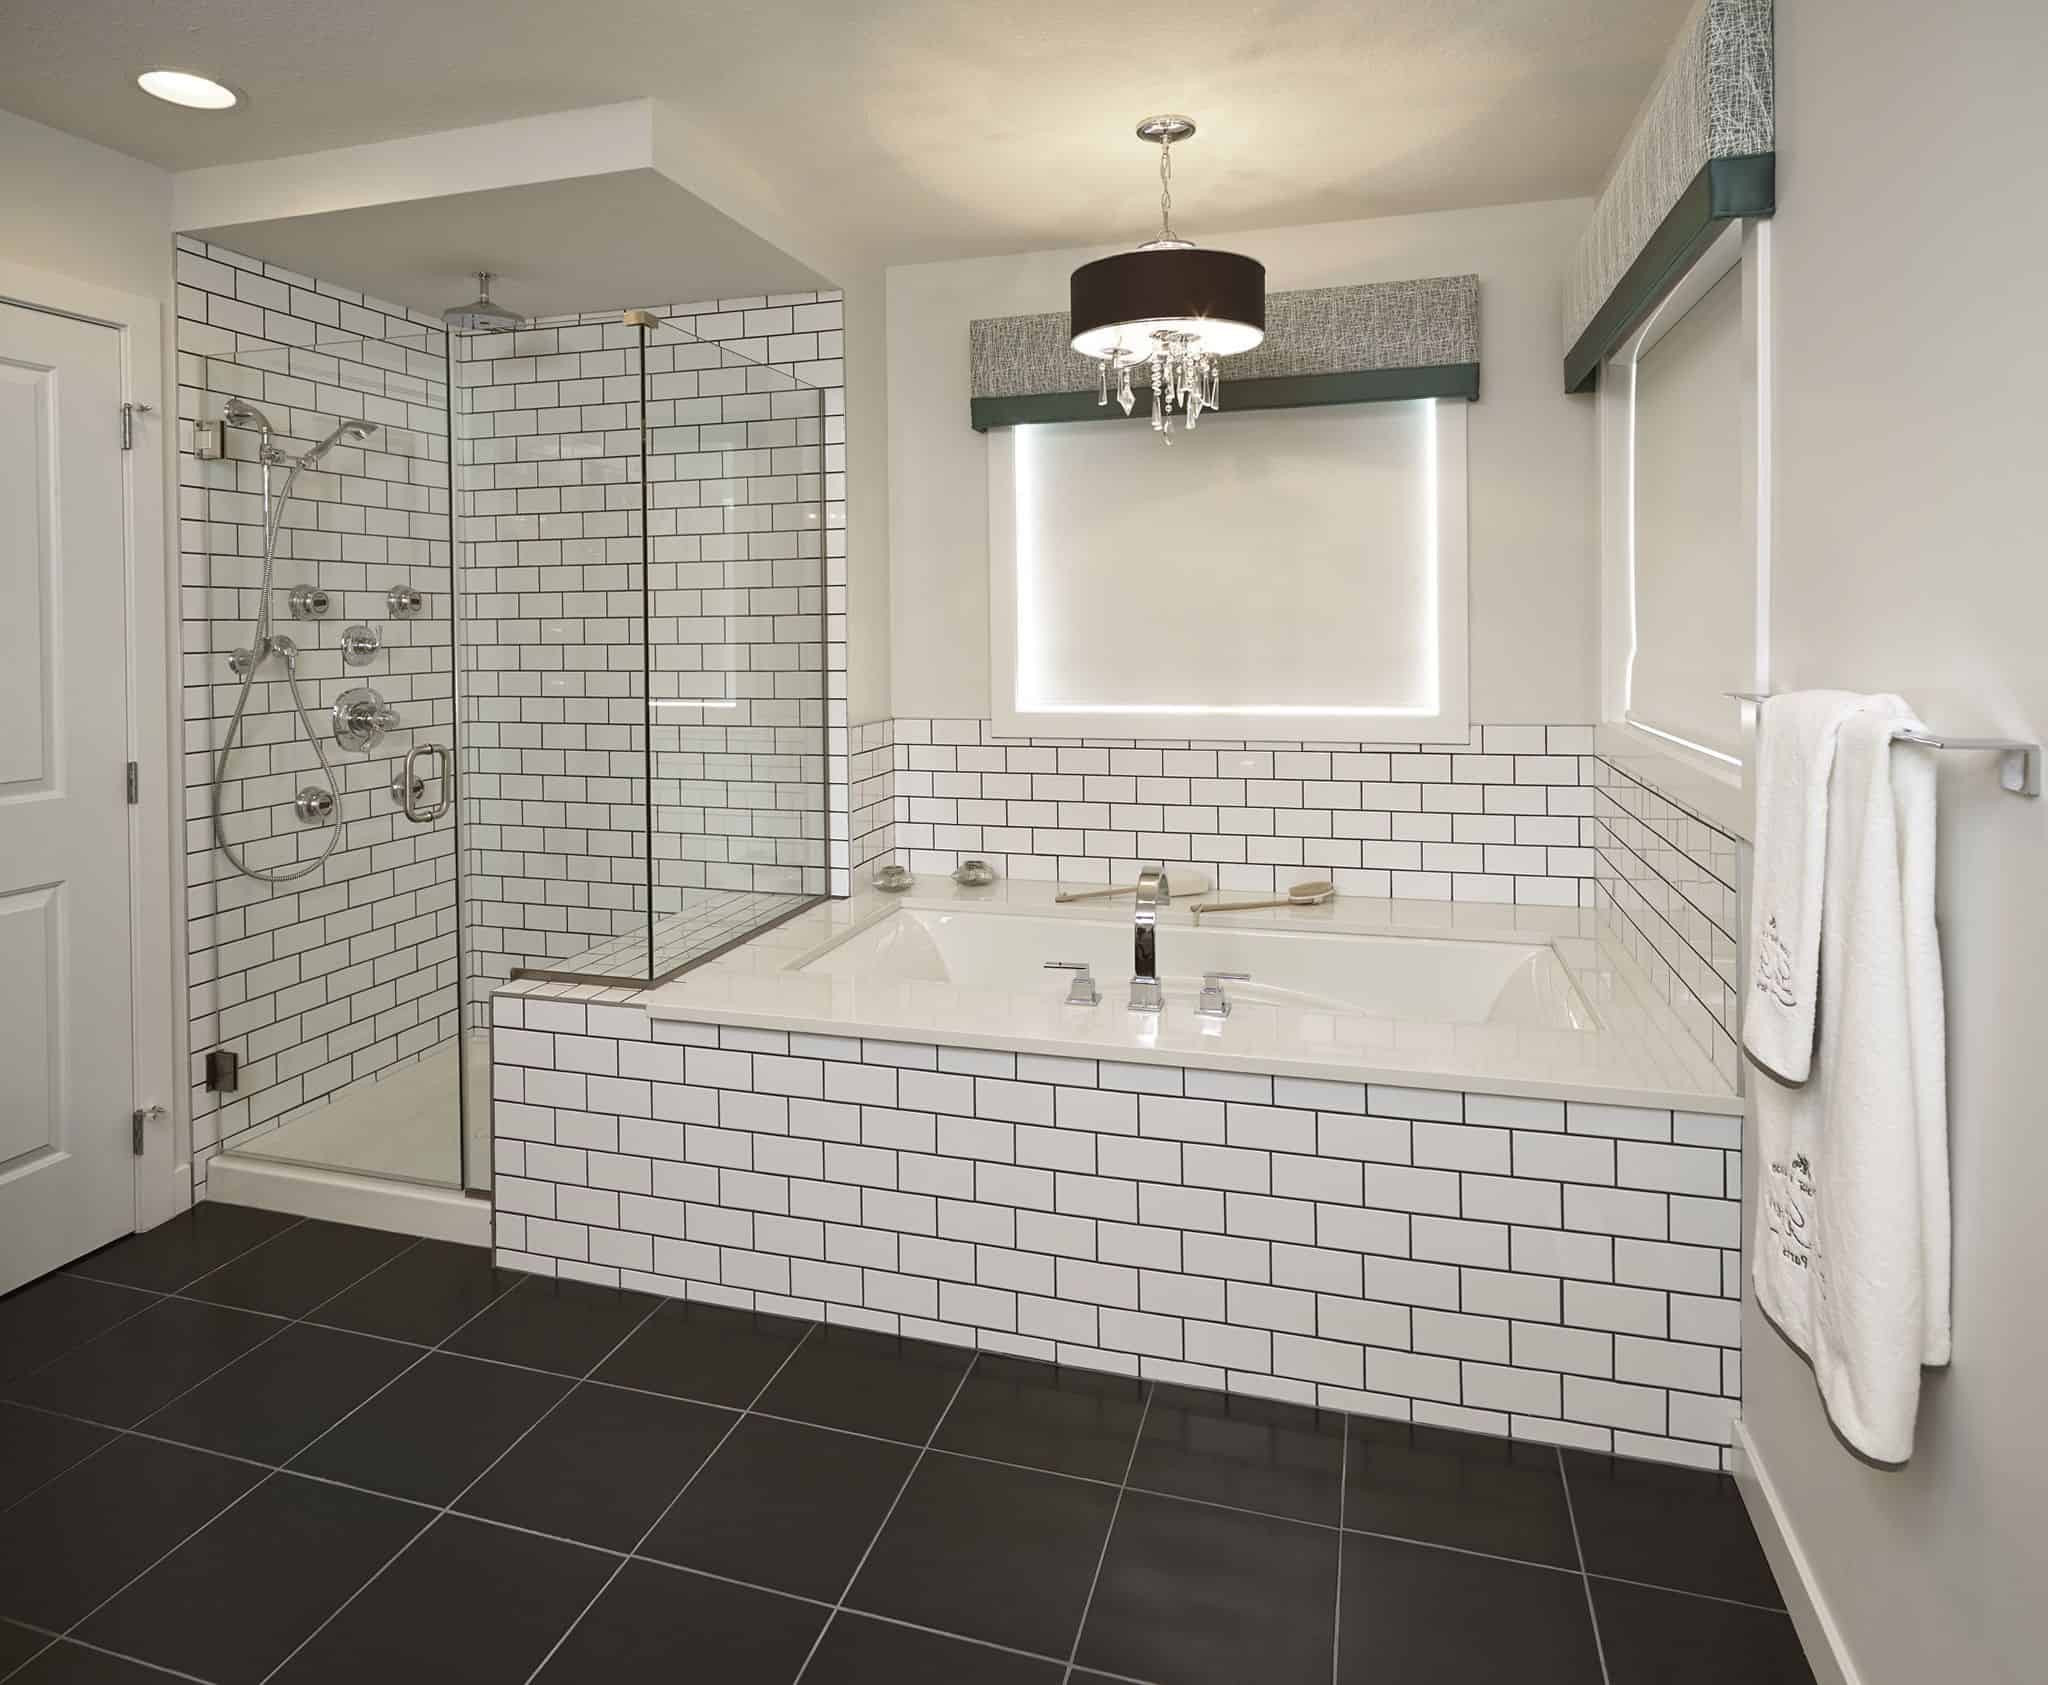 Images Of Bathroom Tile
 Enchanting Bathrooms With Subway Tiles